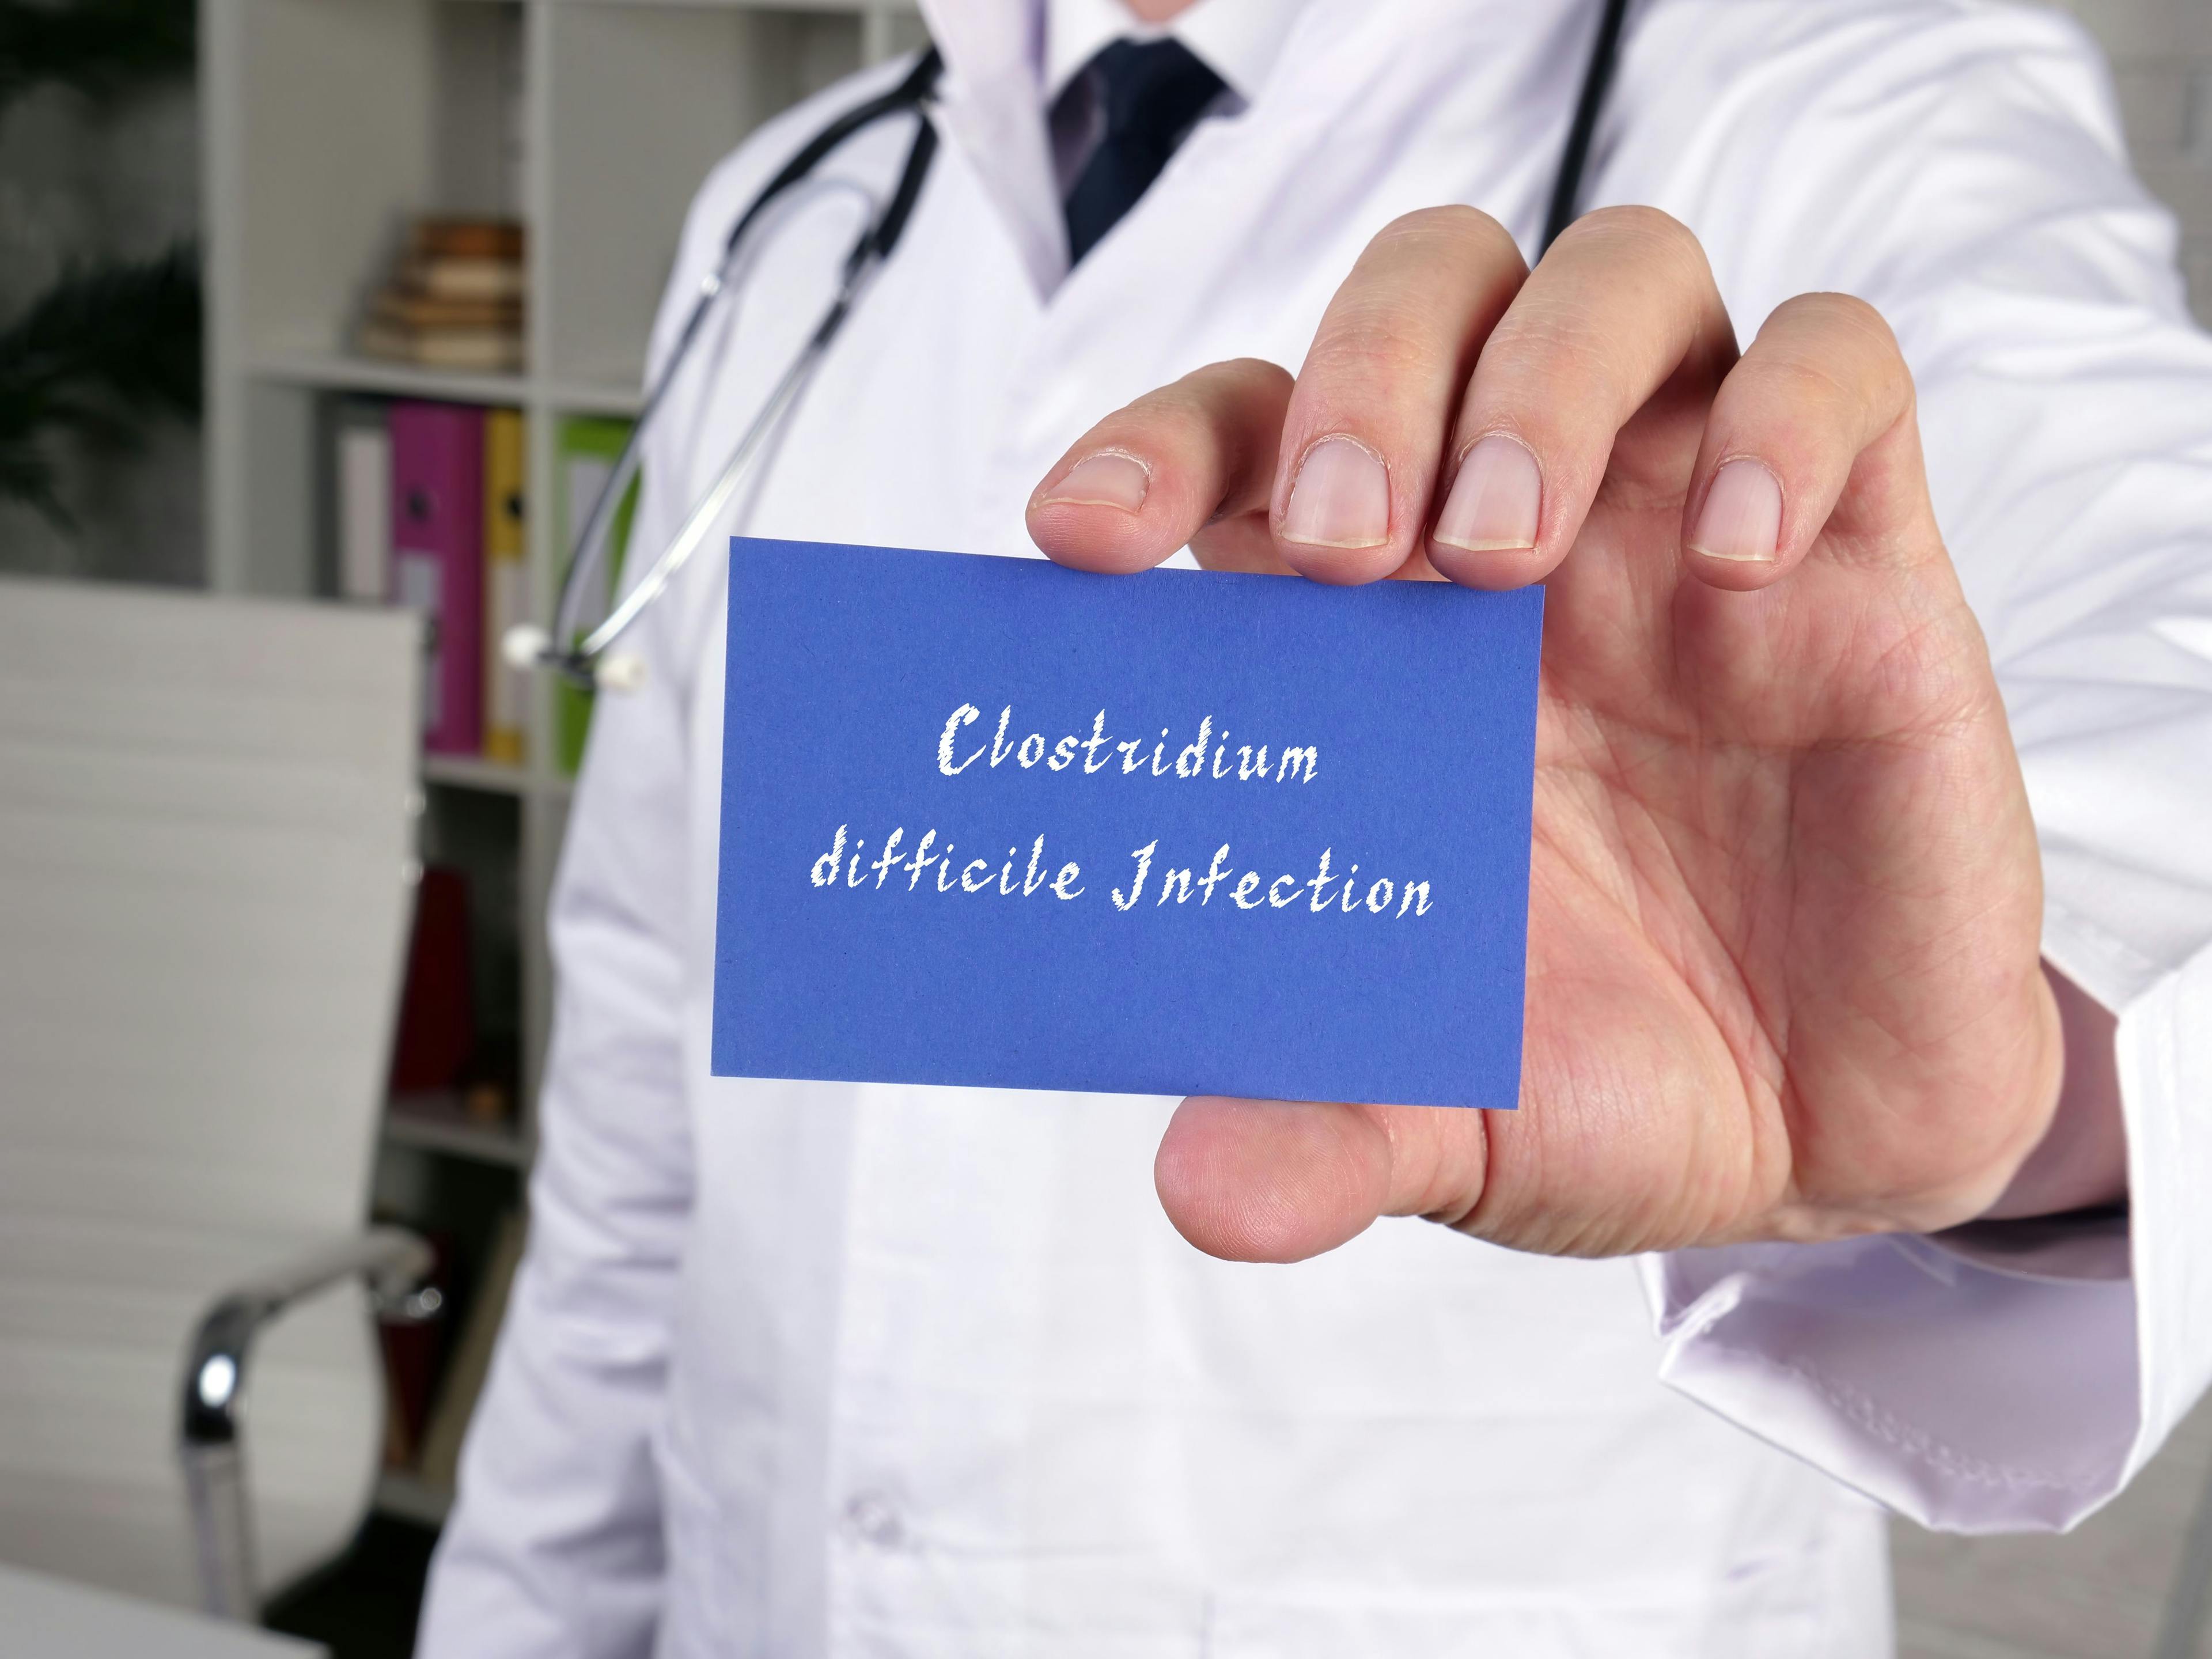 Health care concept meaning Clostridium difficile Infection with phrase on the piece of paper. | Image Credit: Yurii Kibalnik - stock.adobe.com